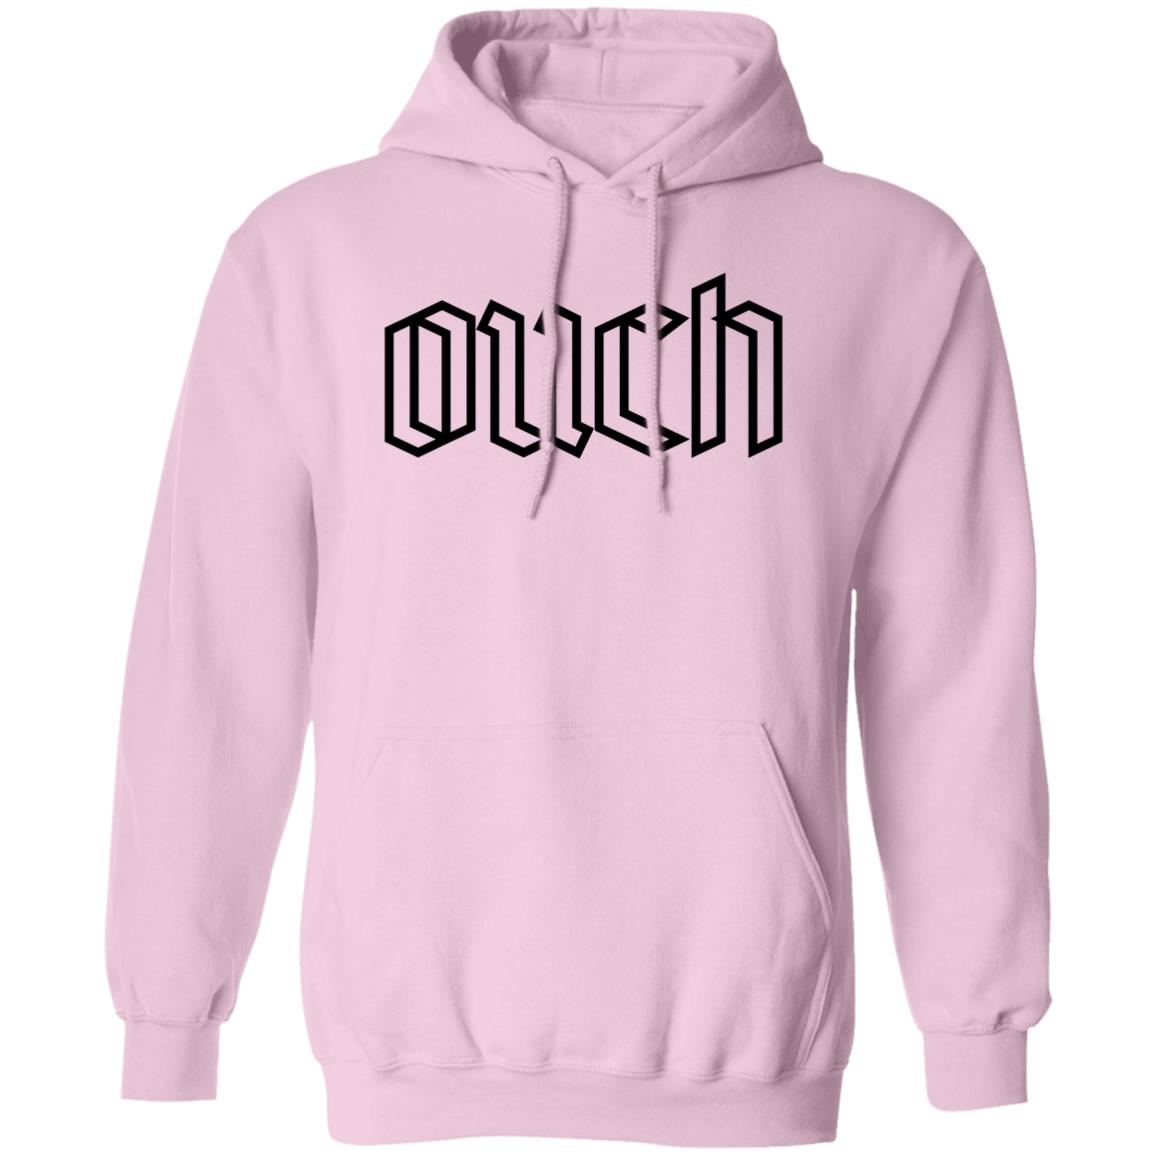 OUCH Hoodie